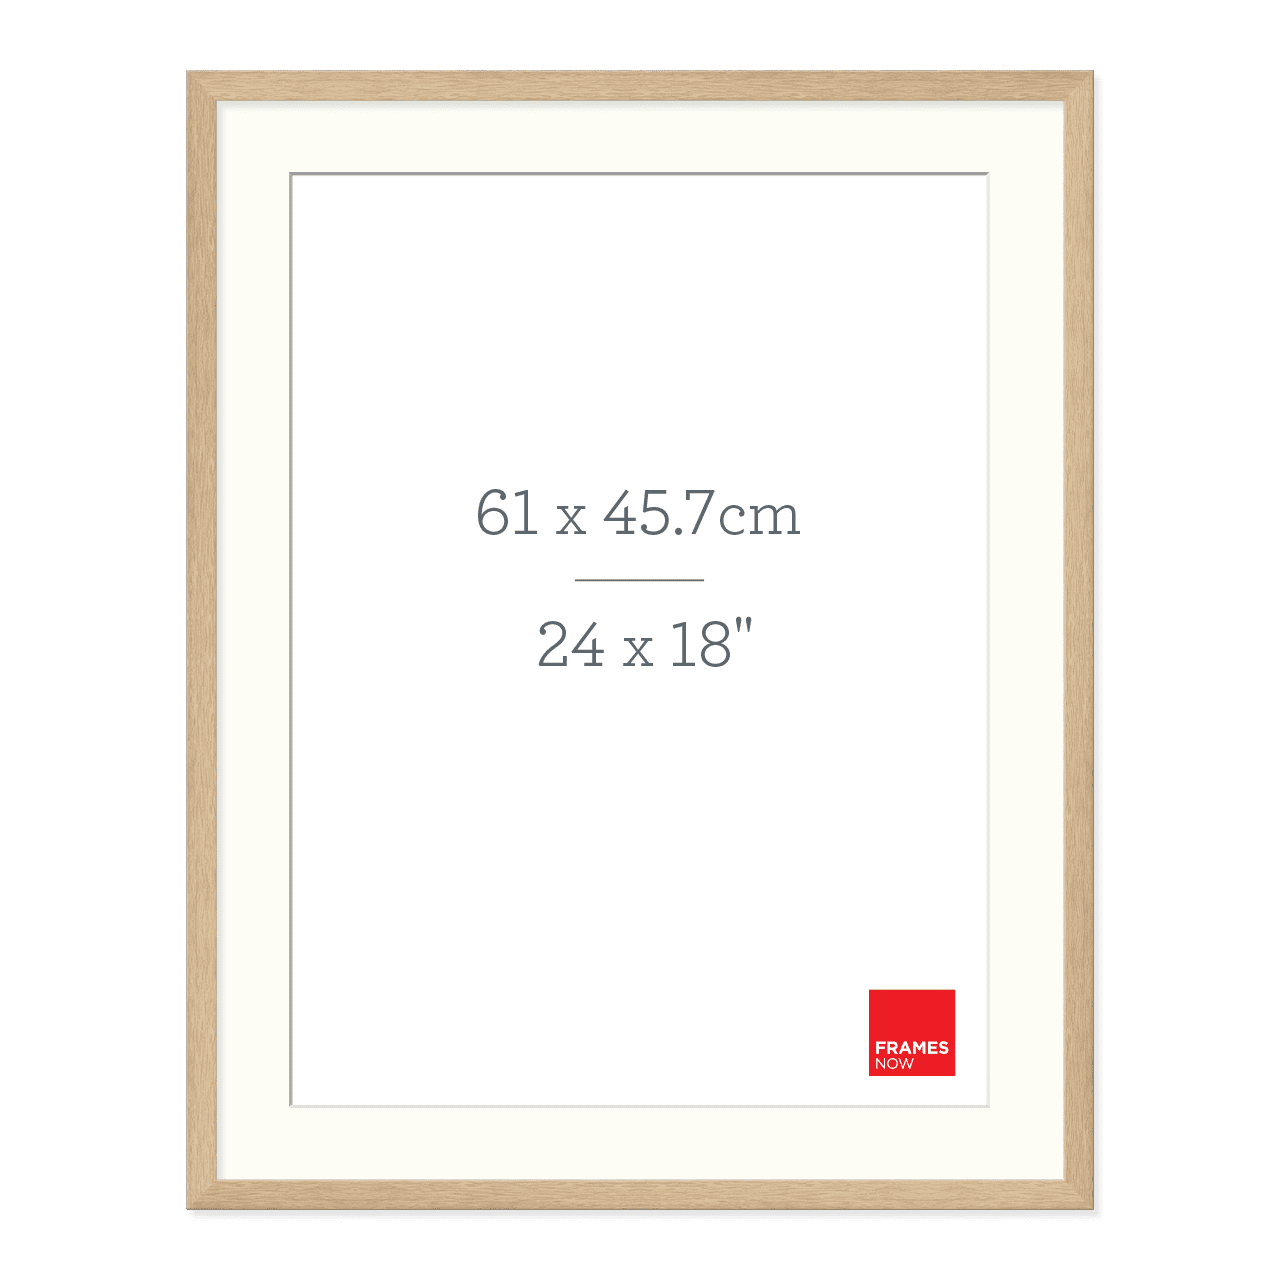 Premium Natural Oak Picture Frame With Matboard for 61 x 45.7cm Artwork